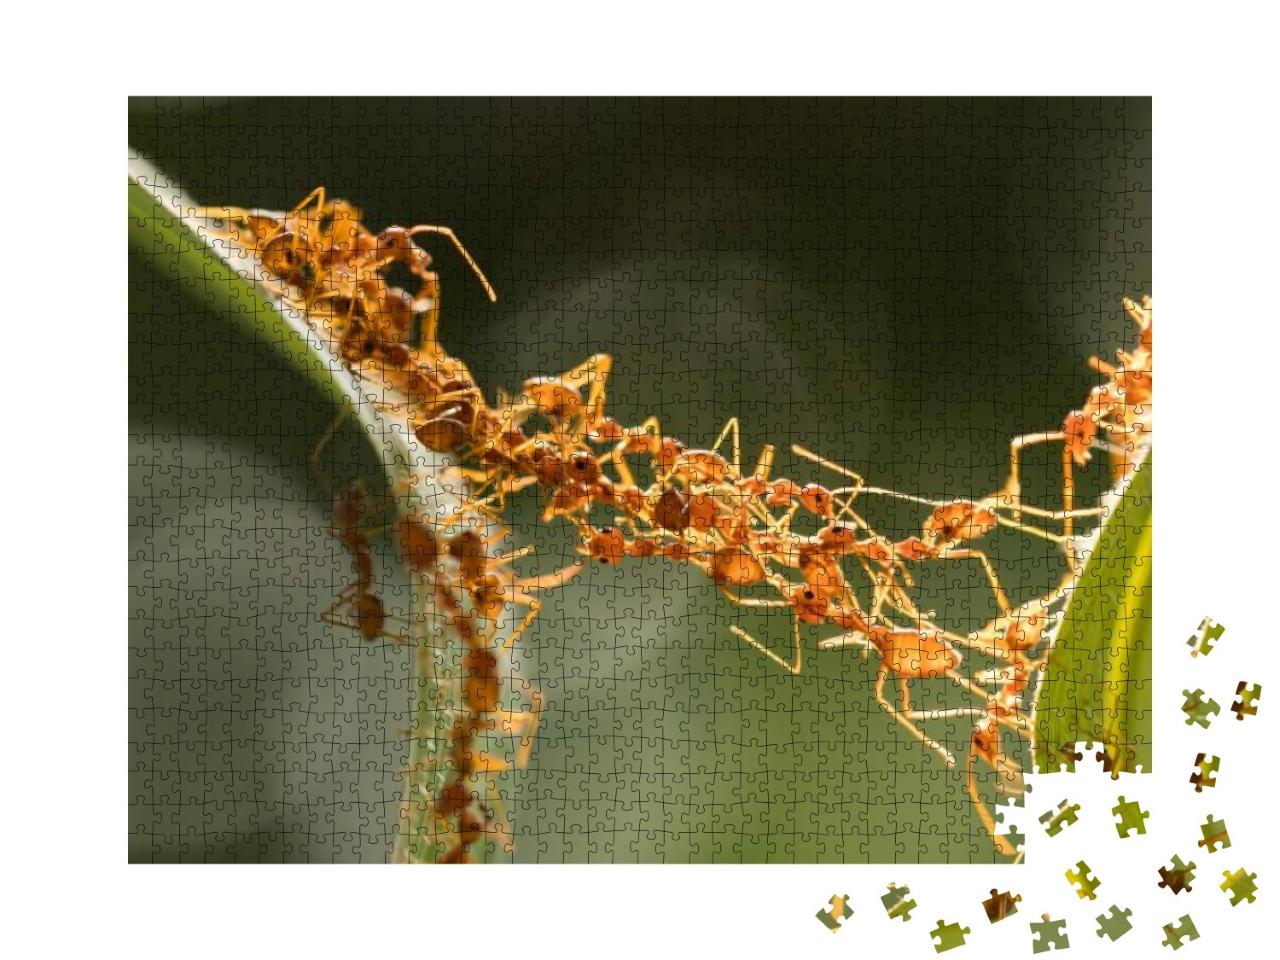 Ant Action Standing. Ant Bridge Unity Team, Concept Team... Jigsaw Puzzle with 1000 pieces